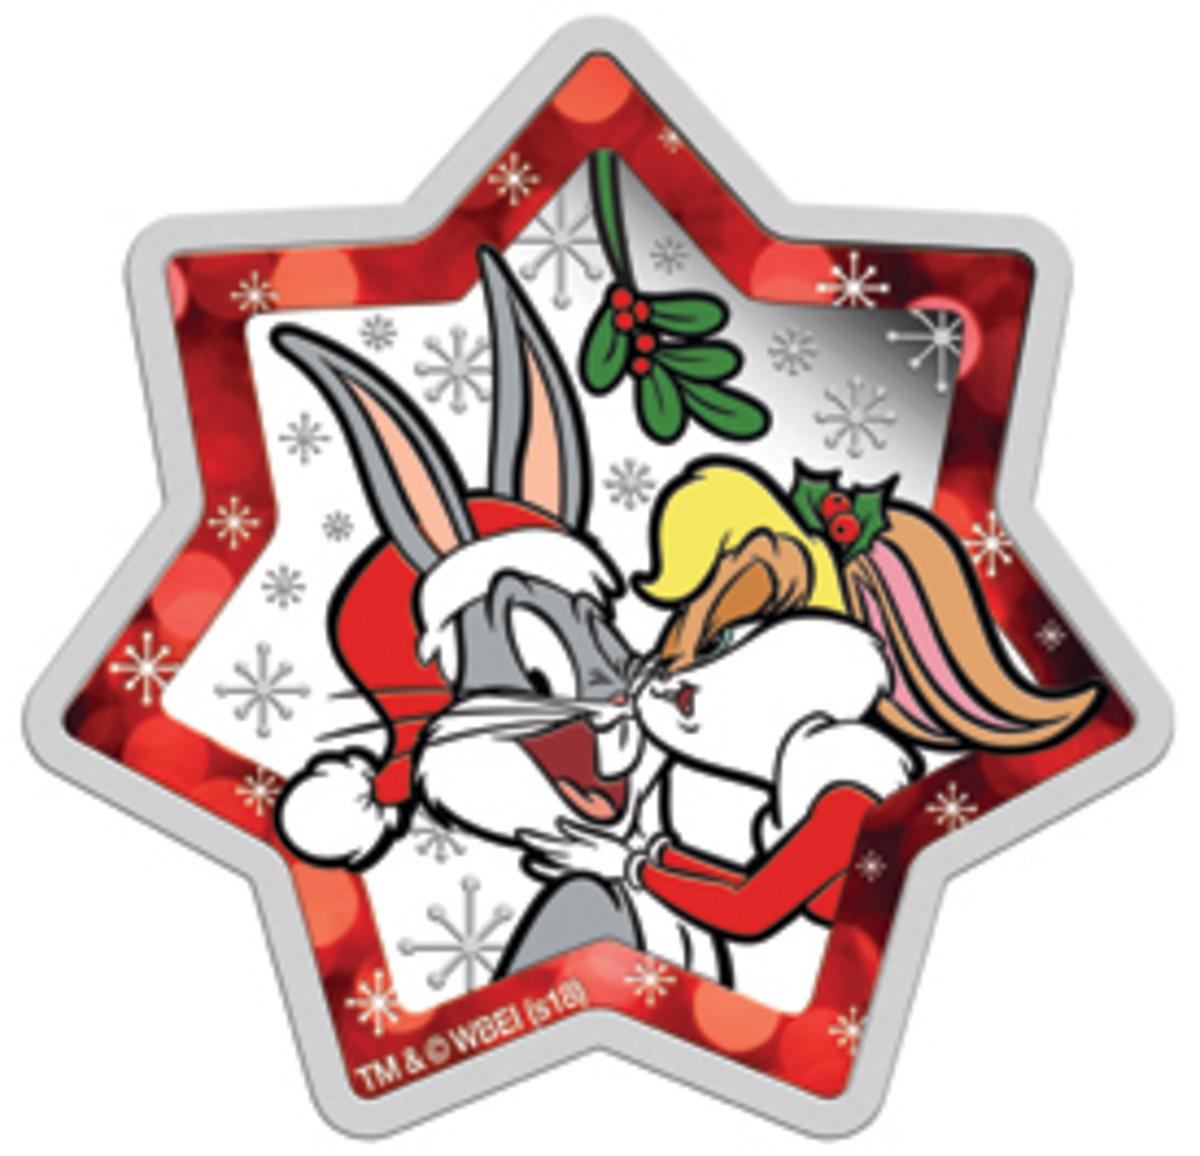  Perth Mint’s star-shaped silver Christmas dollar features Bugs Bunny & friend. (Image courtesy The Perth Mint & Warner Brothers: TM & © WBEI [s18])